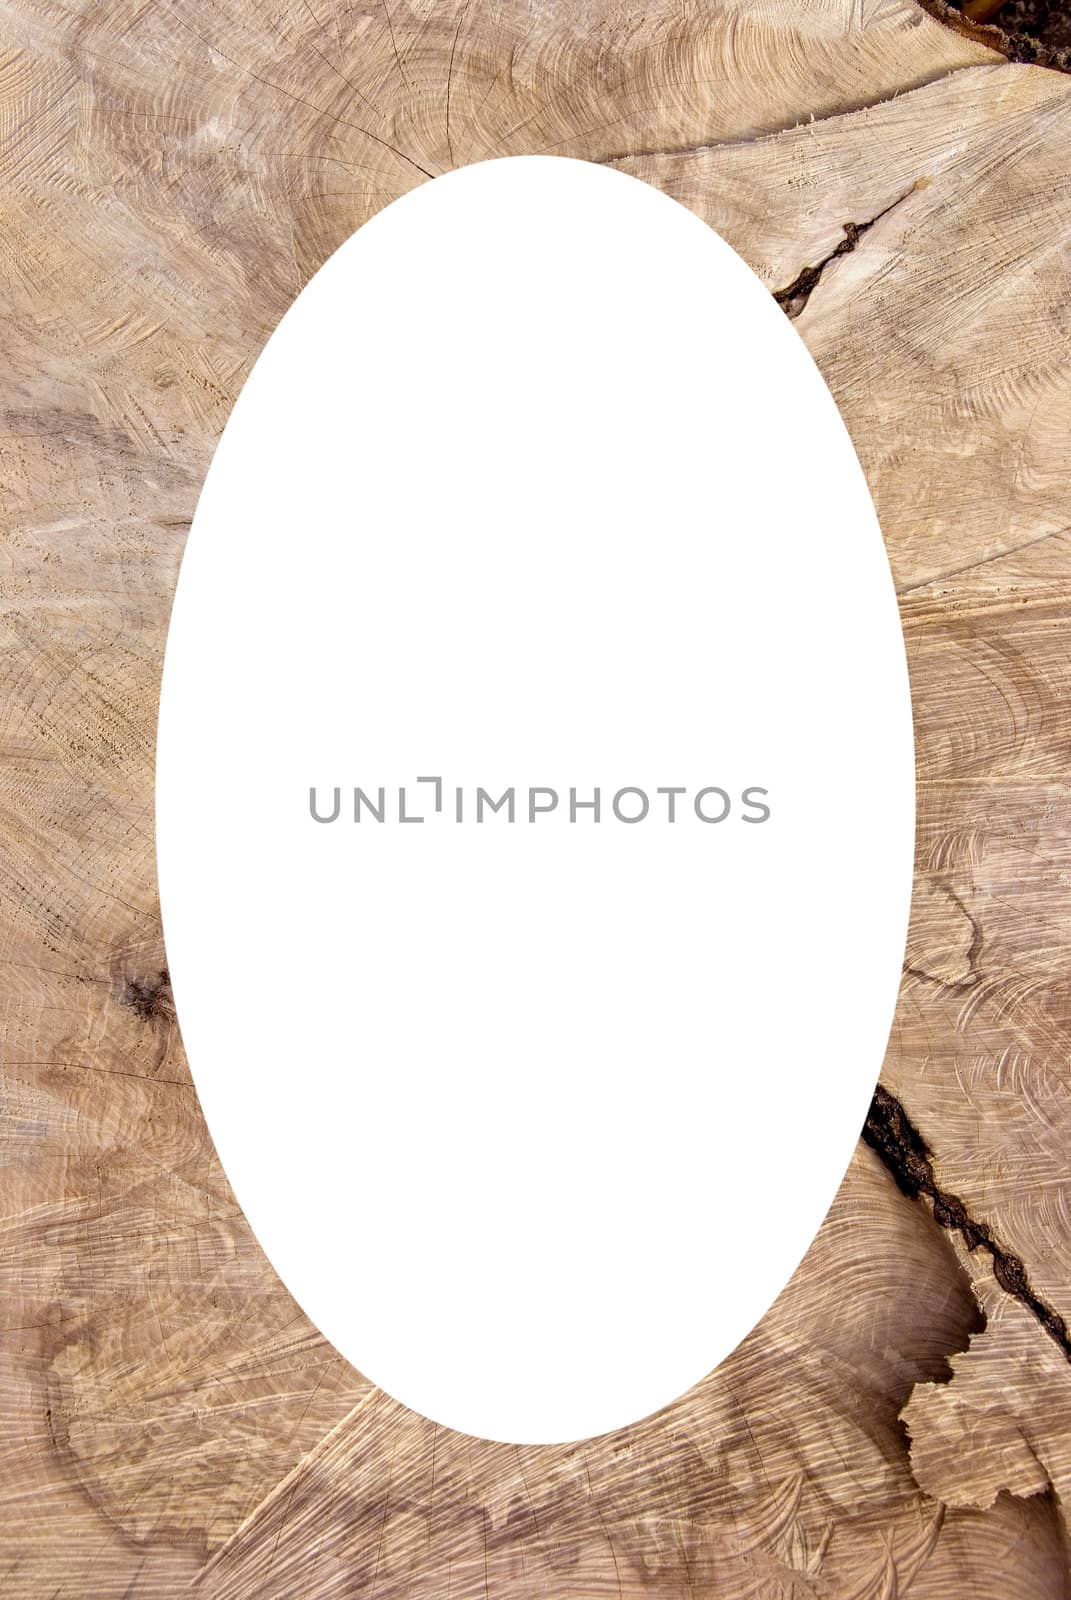 Old tree cutting texture. Wooden background. Isolated white oval place for text photograph image in center of frame.